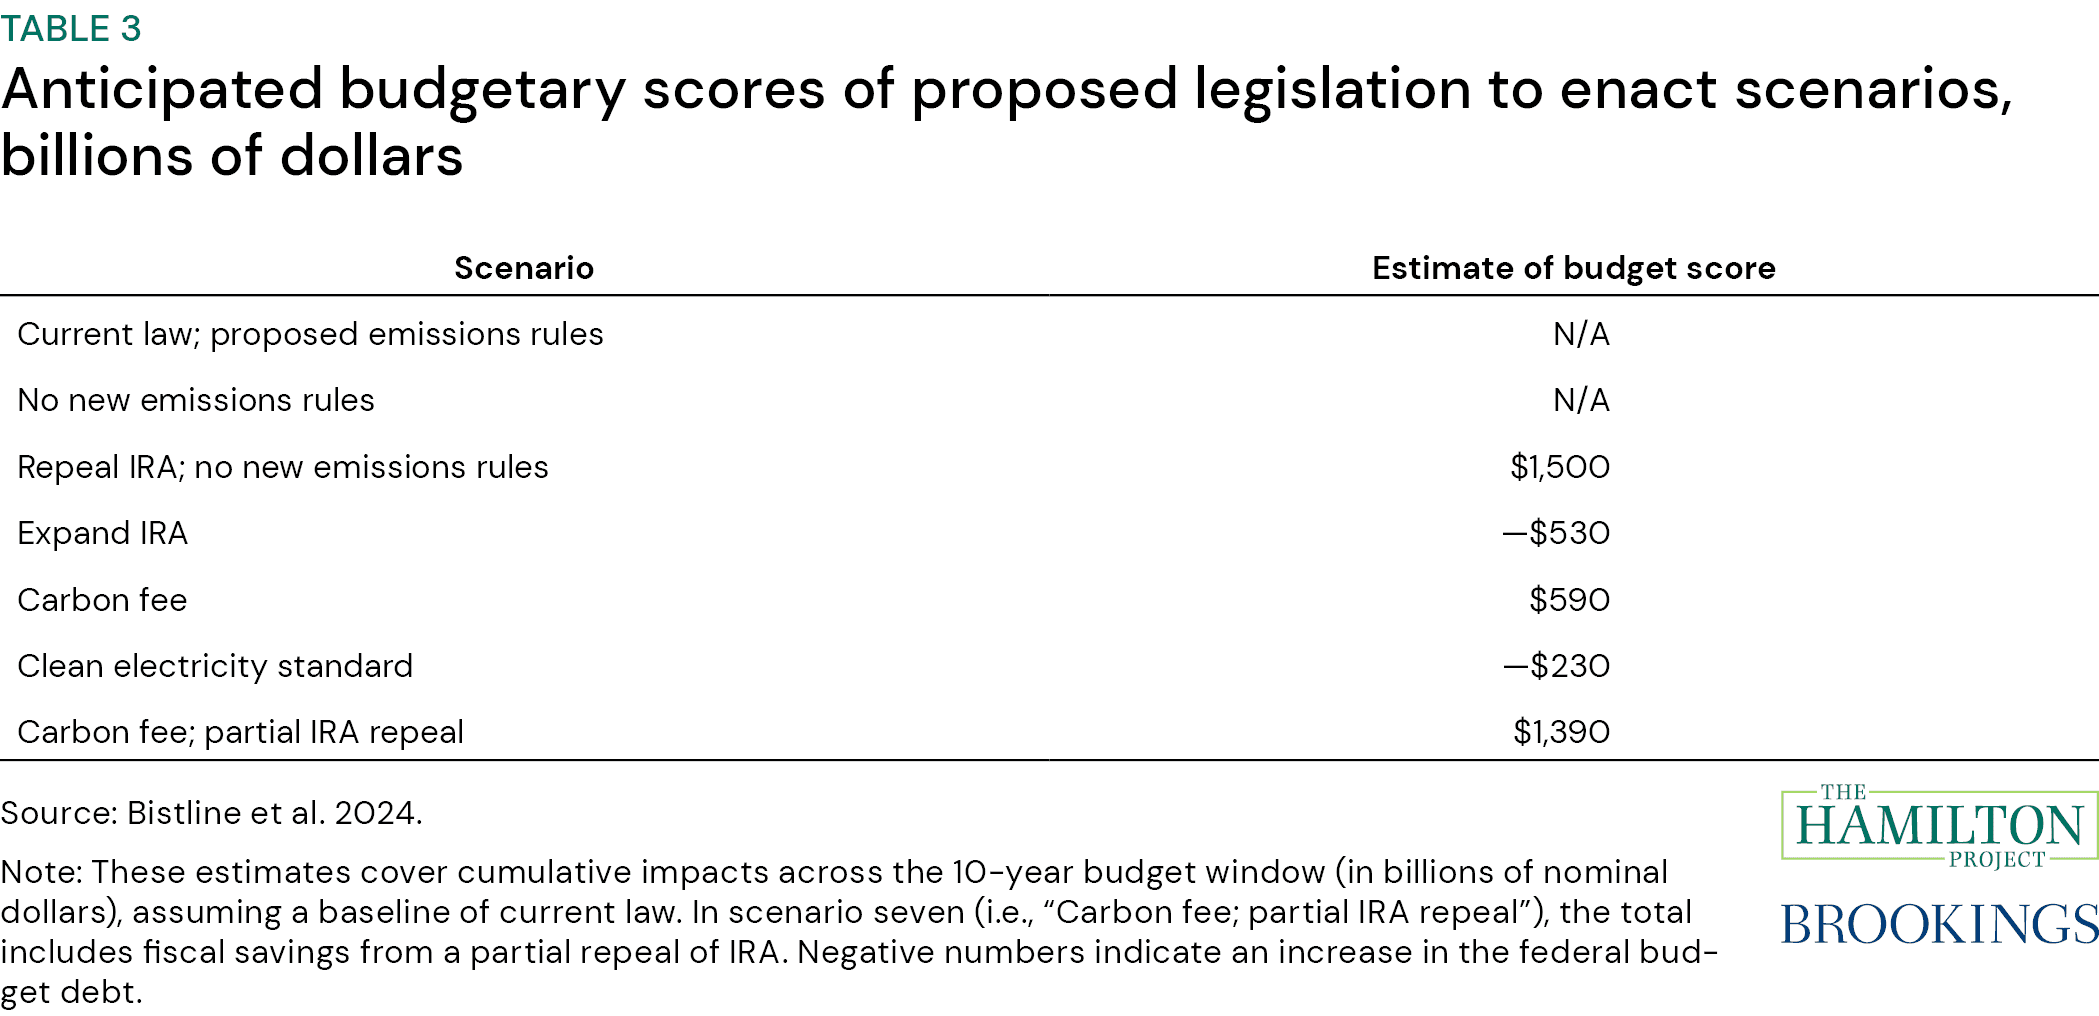 Table 3: Anticipated budgetary scores of proposed legislation to enact climate tax scenarios